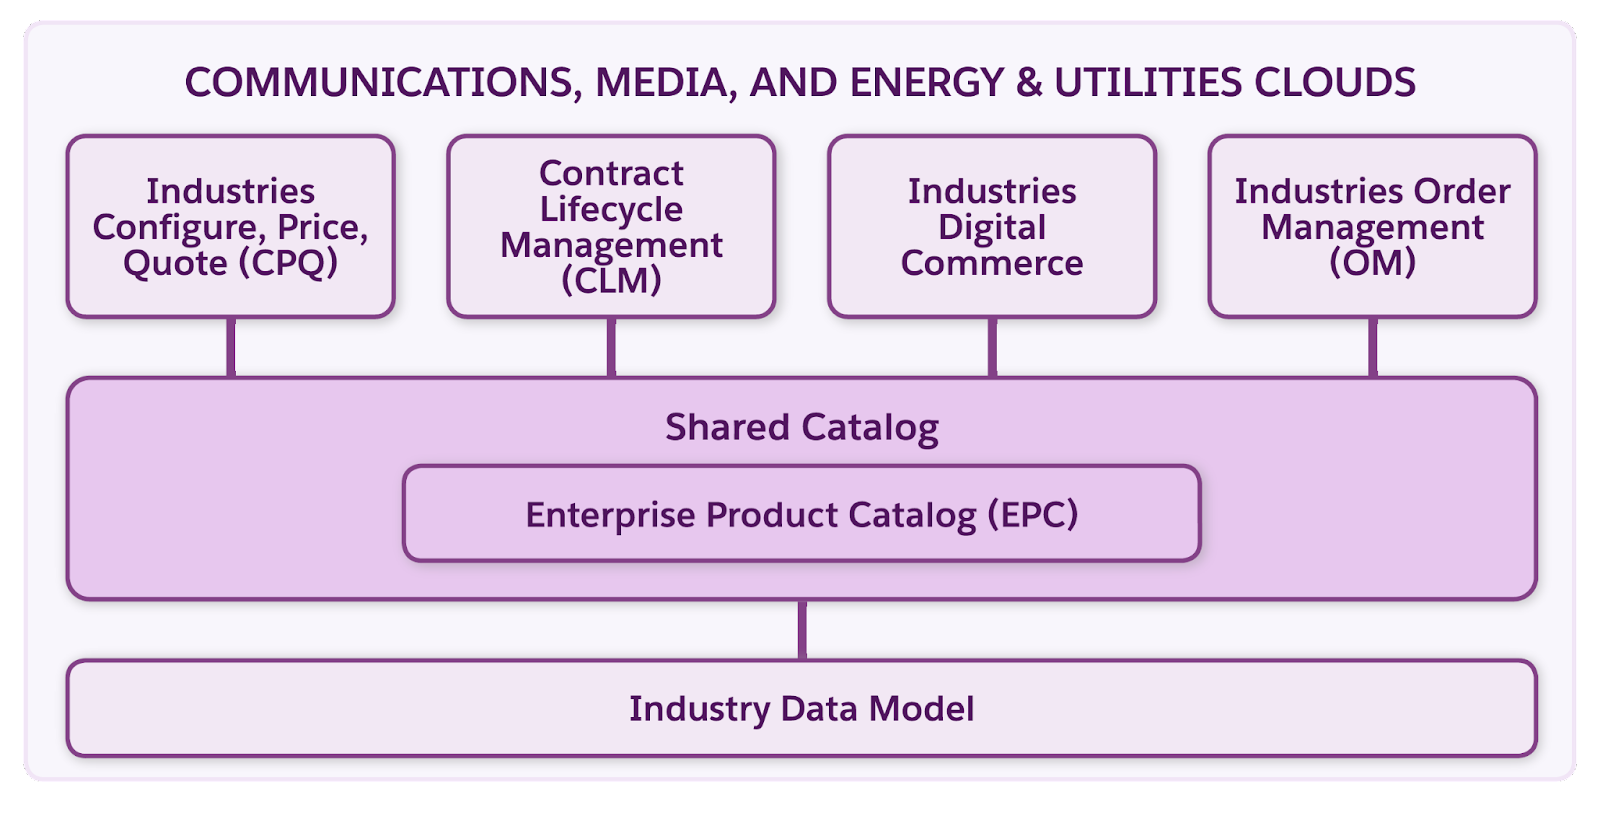 A component diagram showing Industries applications based on EPC, Shared Catalog, and the Industry Data Model